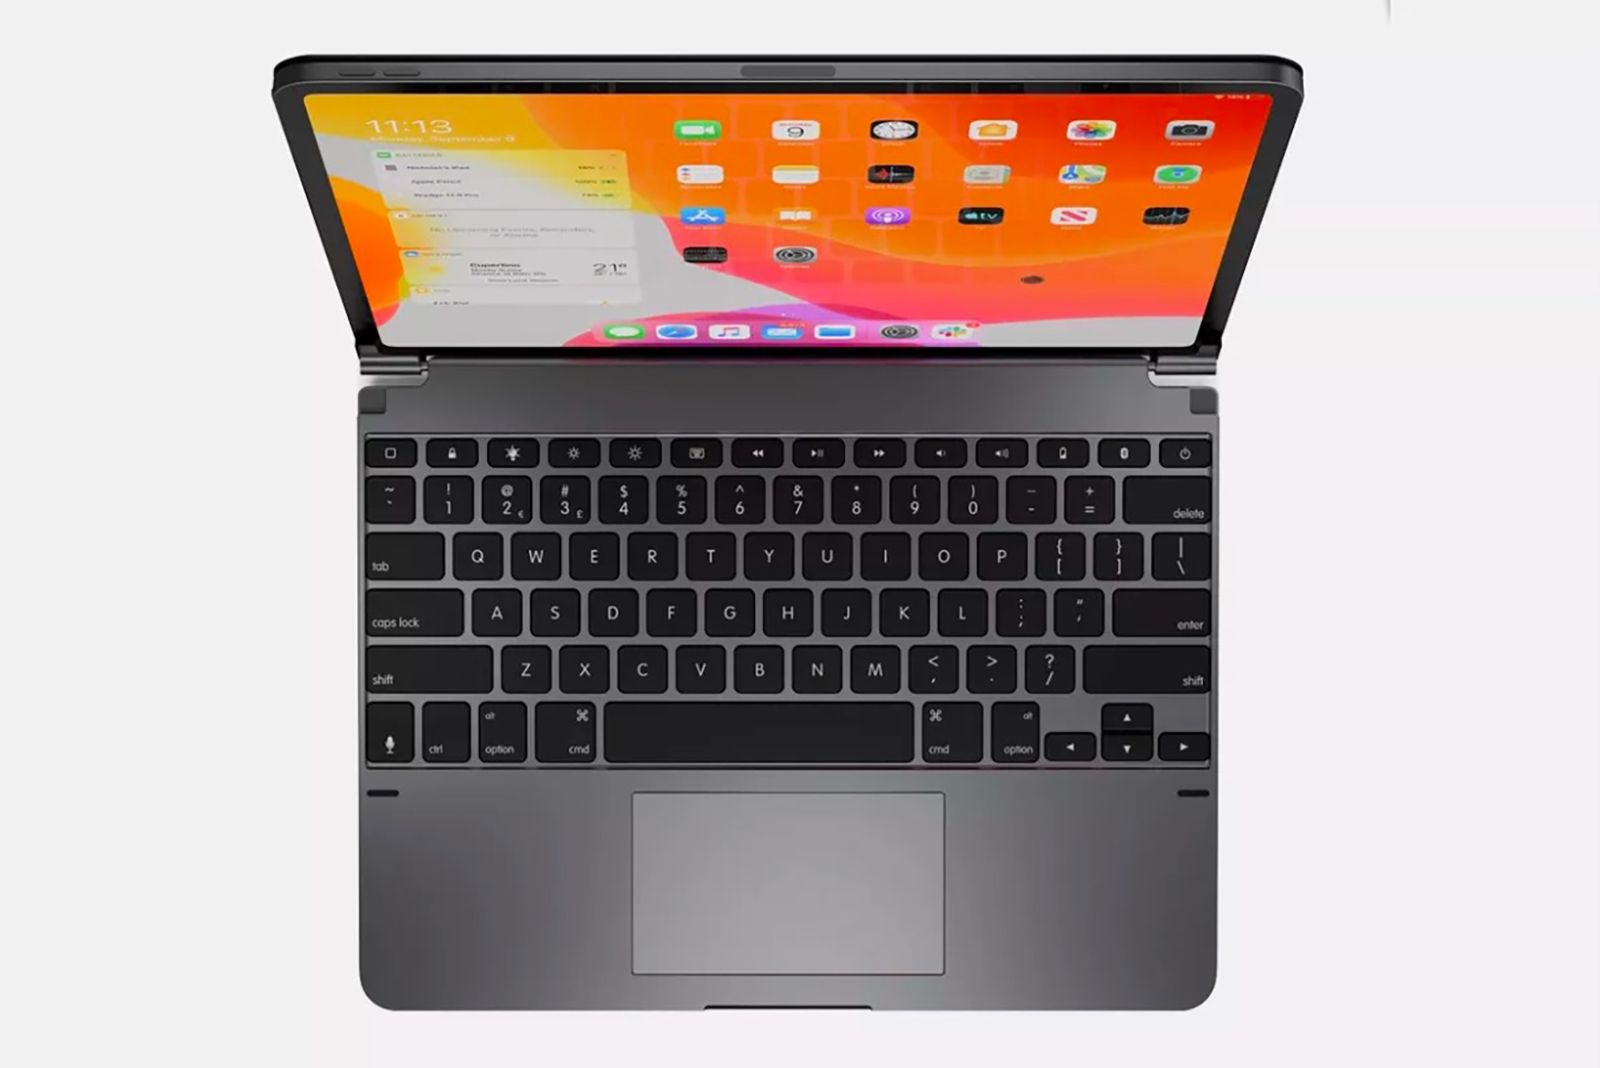 Brydge made an iPad Pro keyboard with a multi-touch trackpad image 1